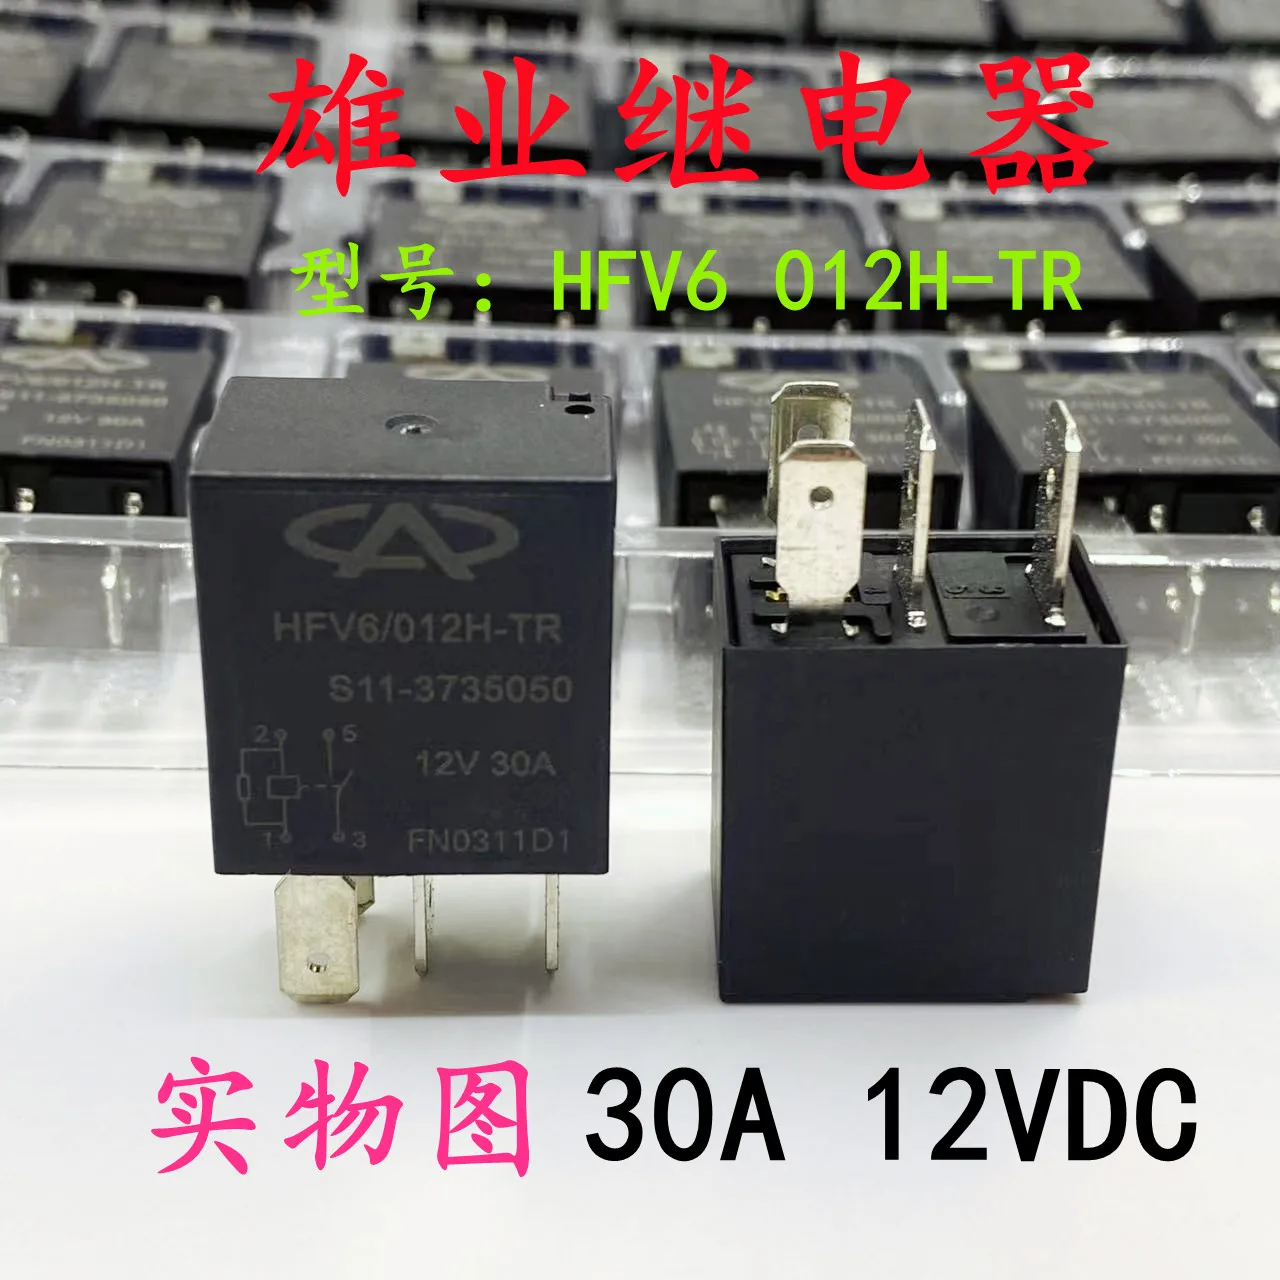 

2pcs HFV6 012H-TR 30A 12VDC for Chery Emgrand Great Wall Volkswagen Fan Oil Pump Air Conditioning A/C car Relay